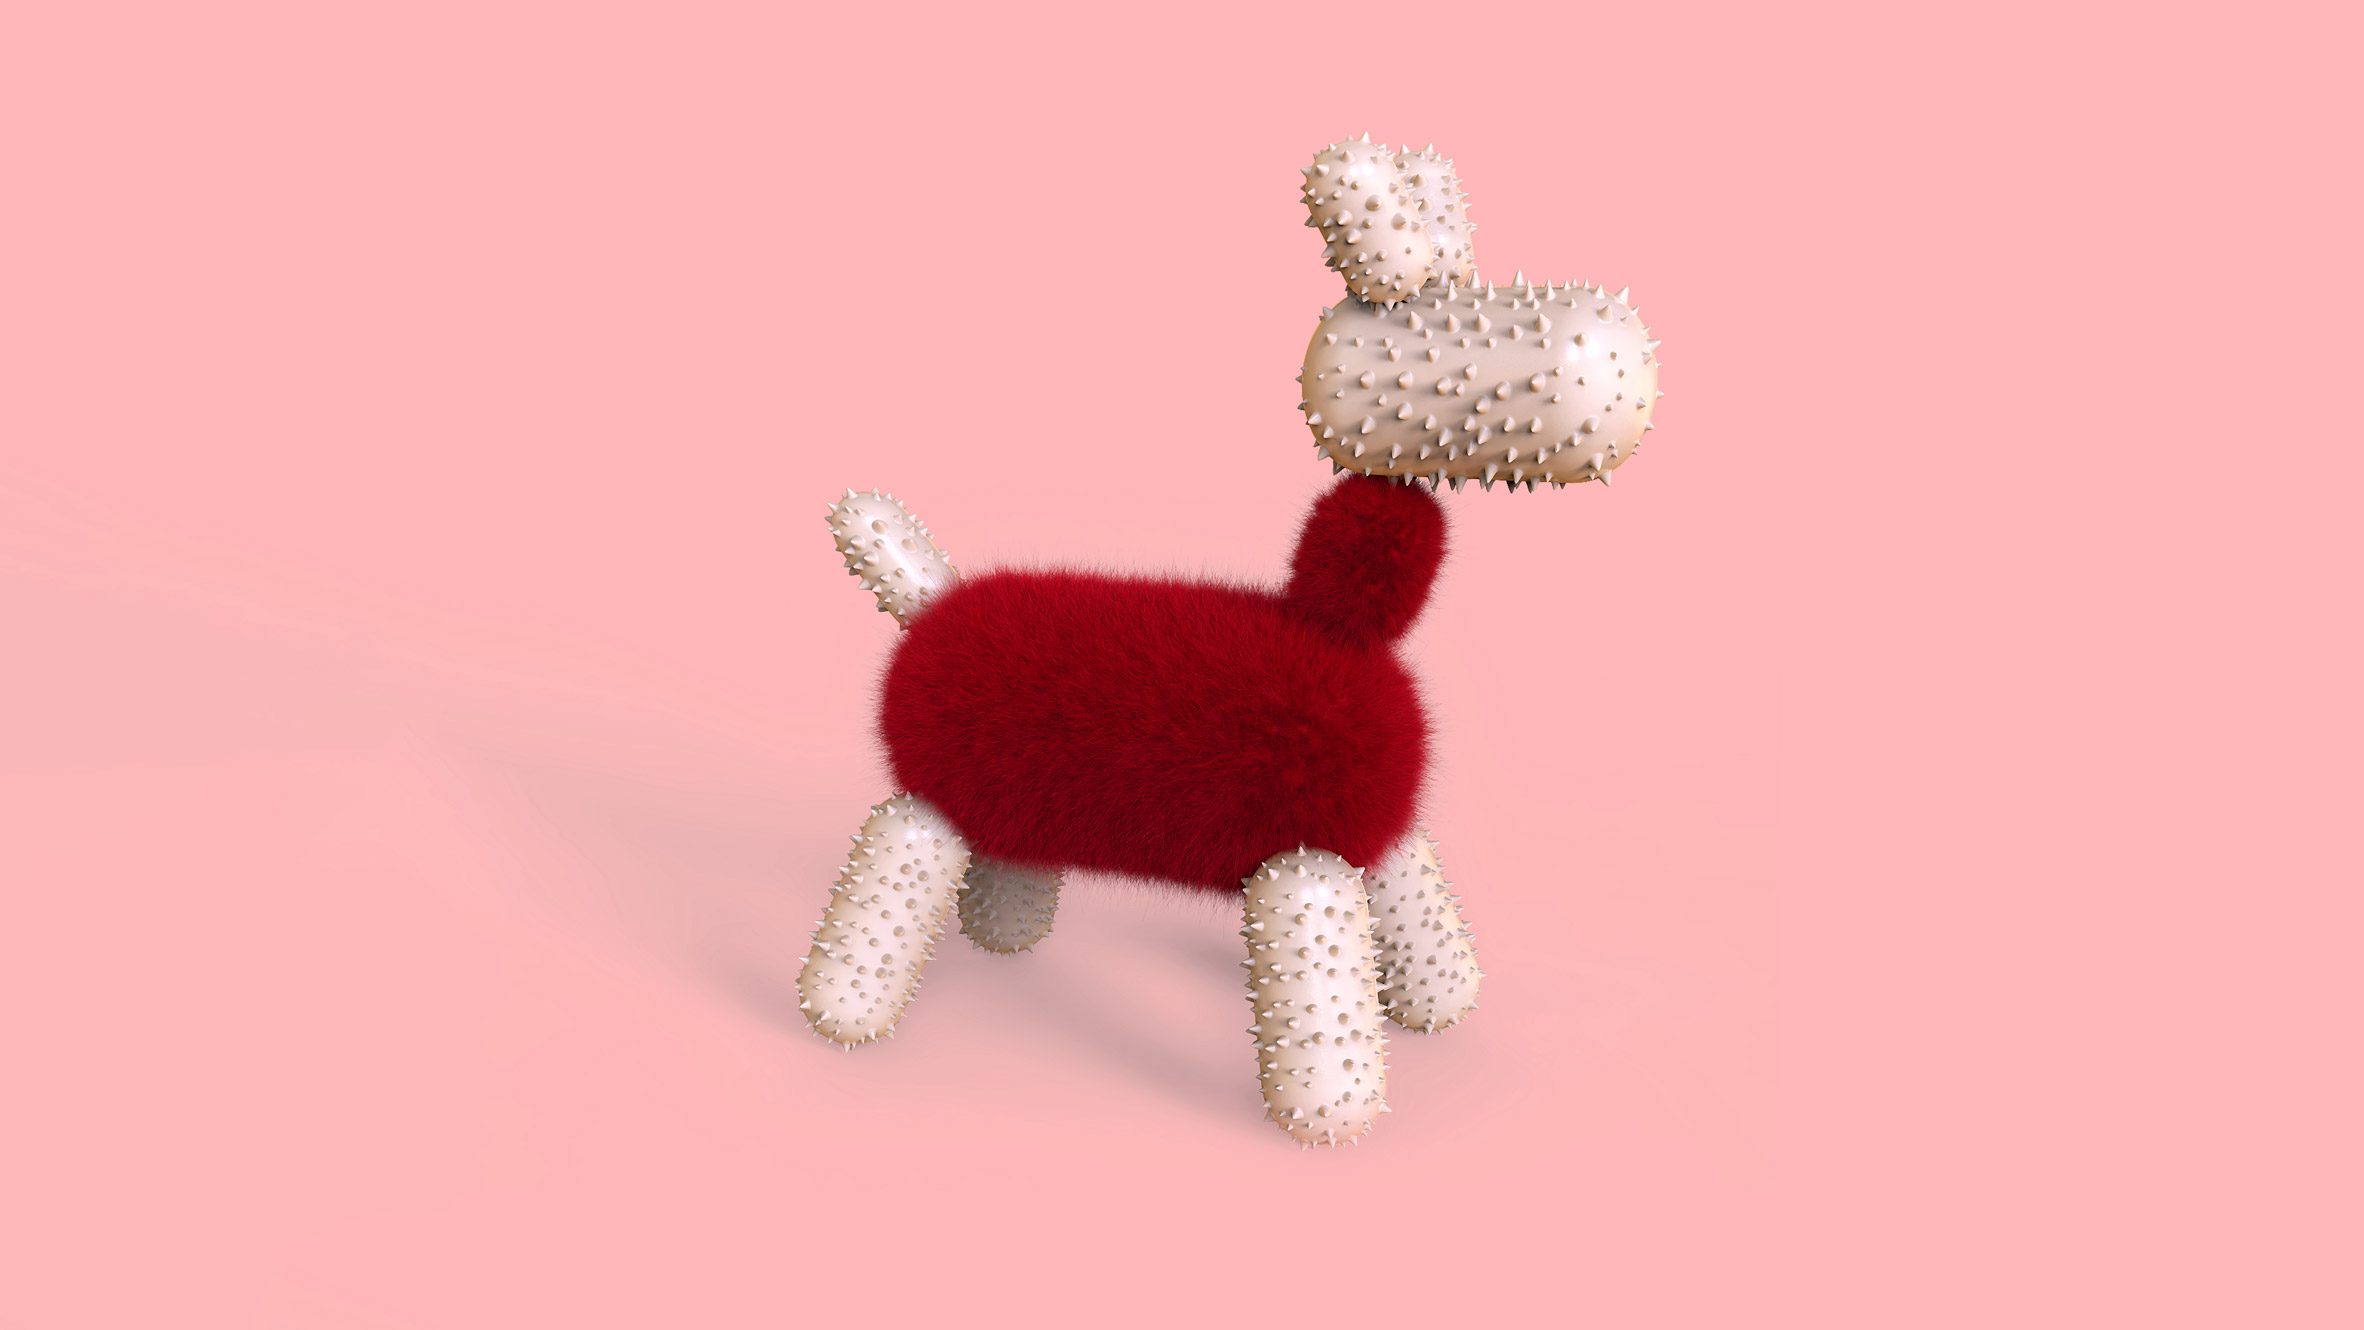 a spiny toy dog designed by Nahid Shirzadkhan, Master of Design in Industrial Design student at University of Illinois Chicago